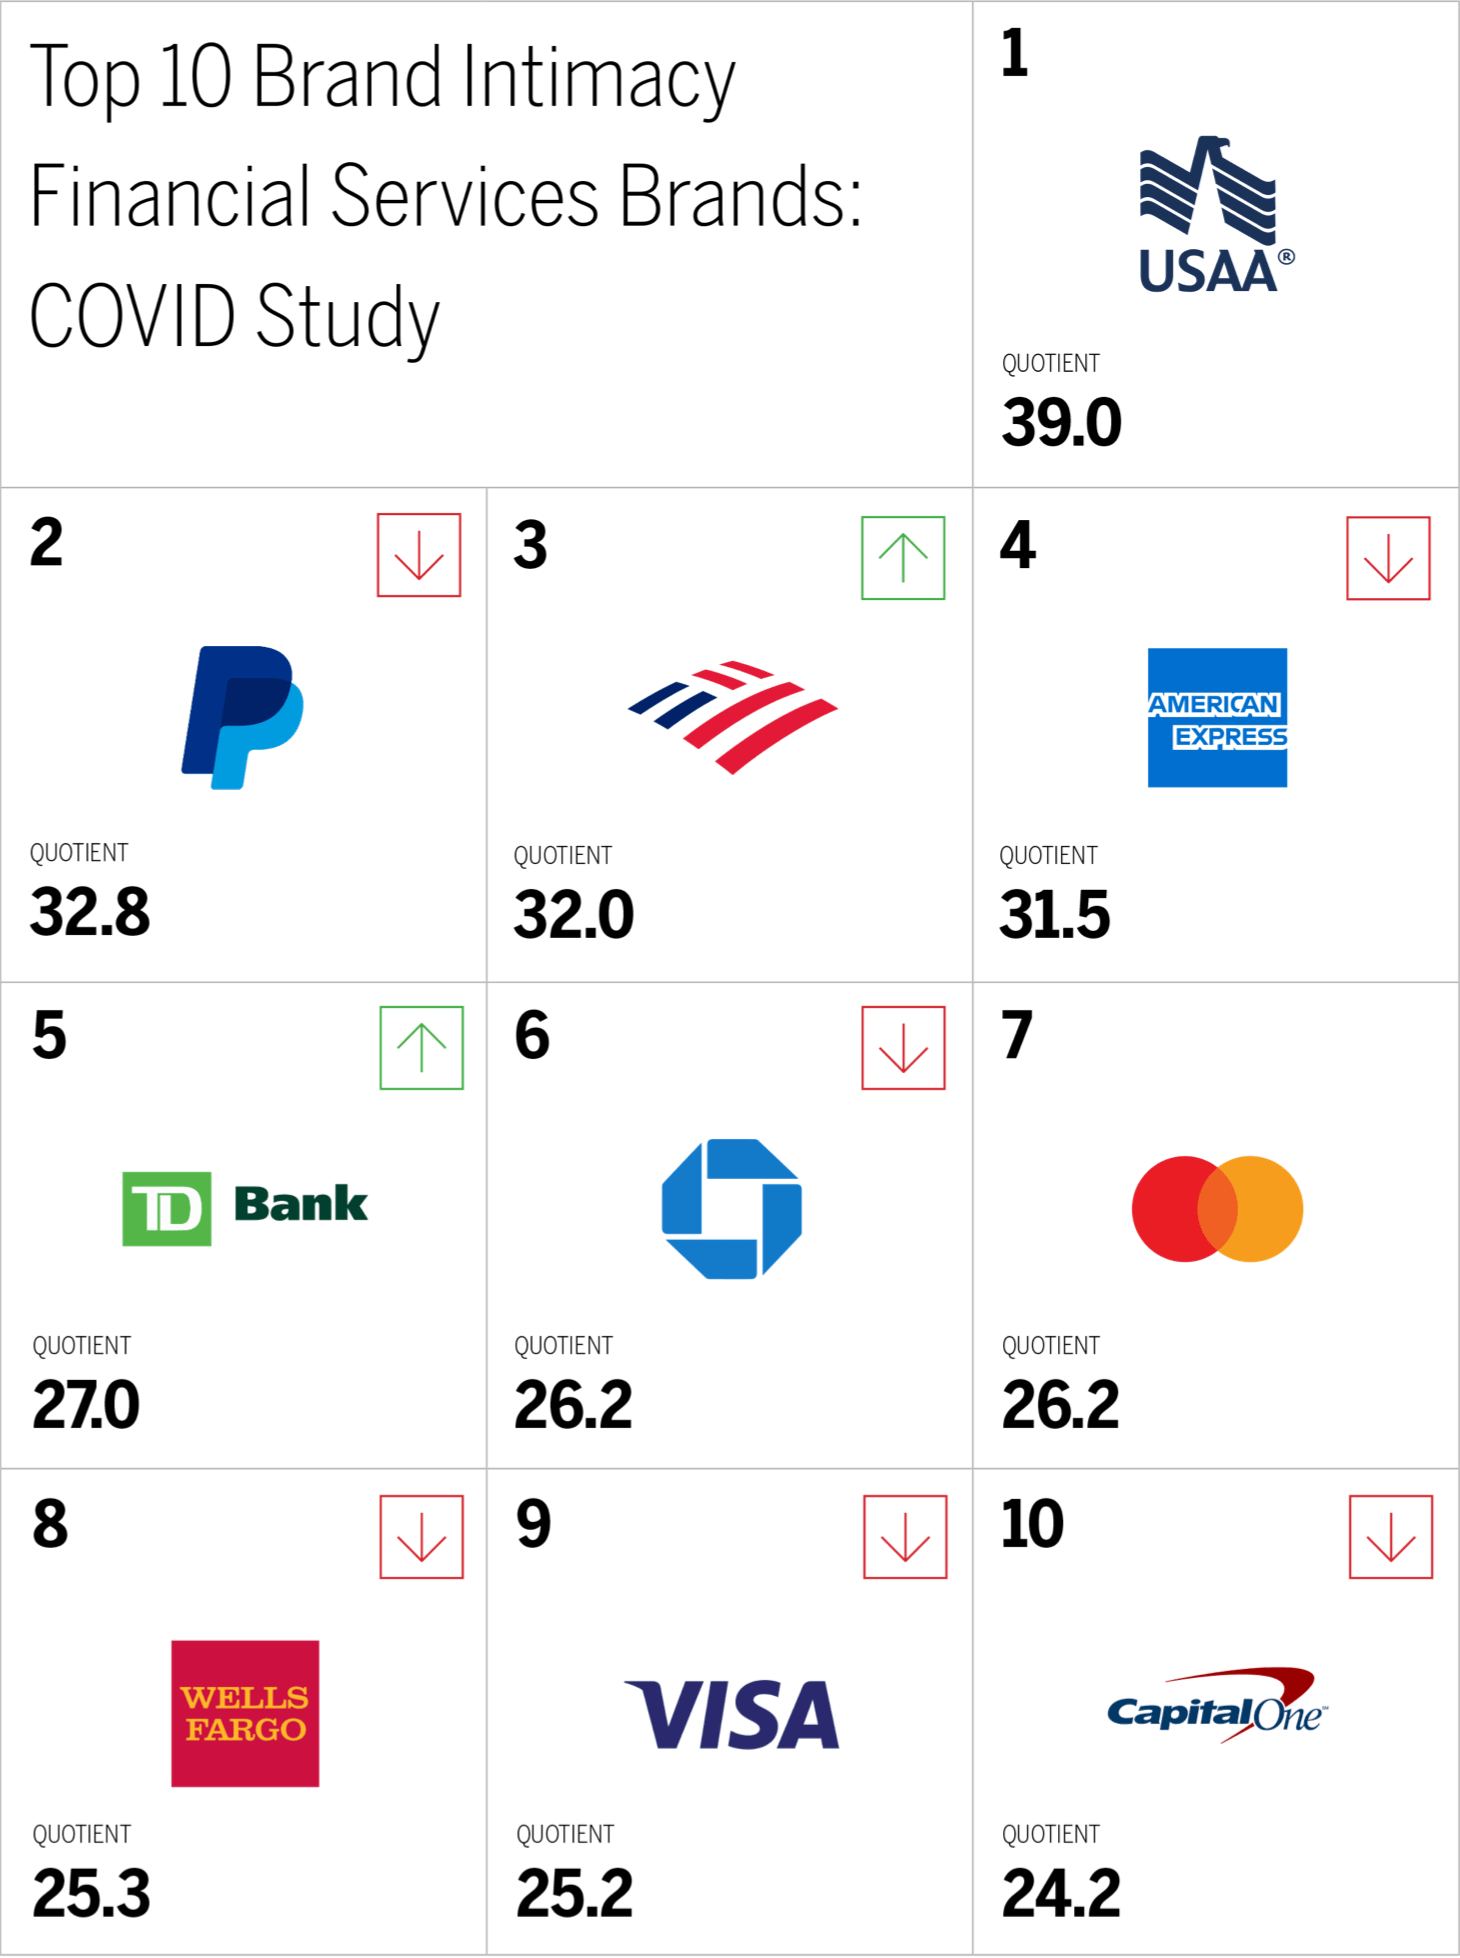 Top 10 Brand Intimacy
Financial Services Brands:
COVID Study Chart